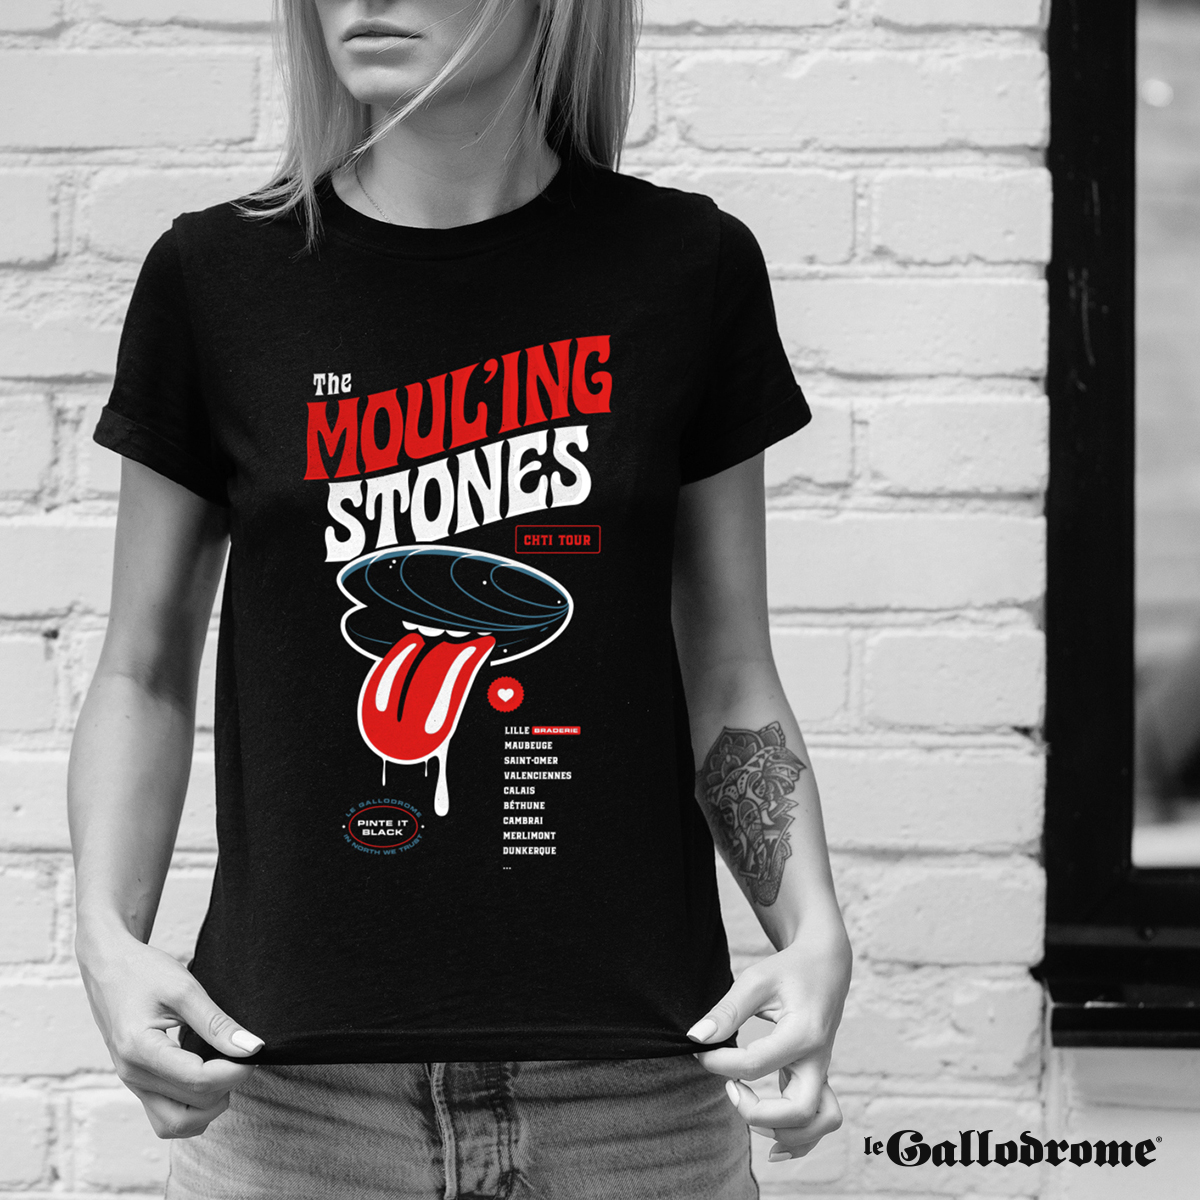 THE MOUL'ING STONES TOUR